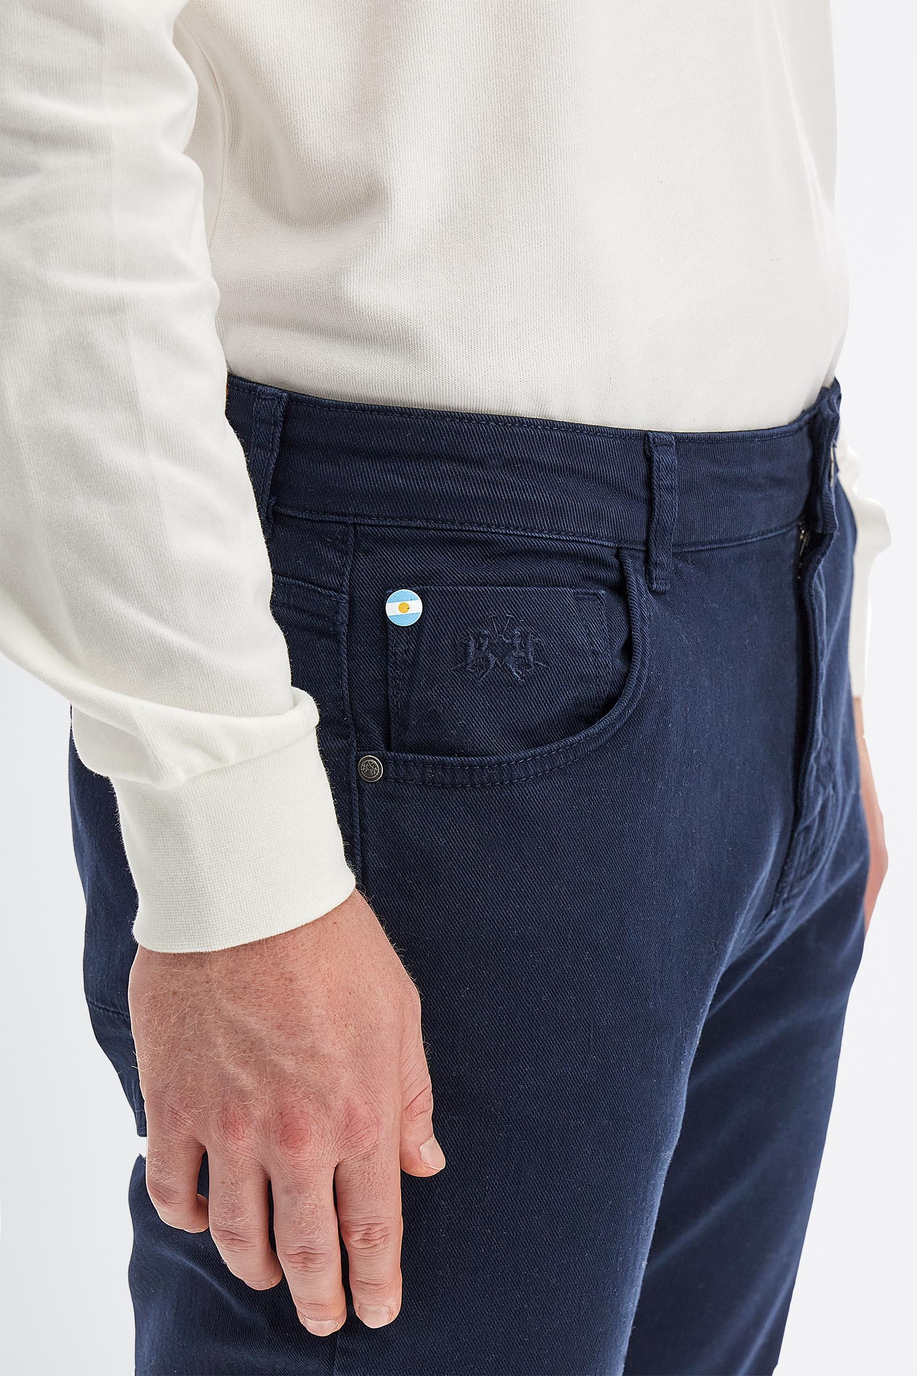 Men’s trousers in stretch cotton regular fit chino model - Trousers | La Martina - Official Online Shop